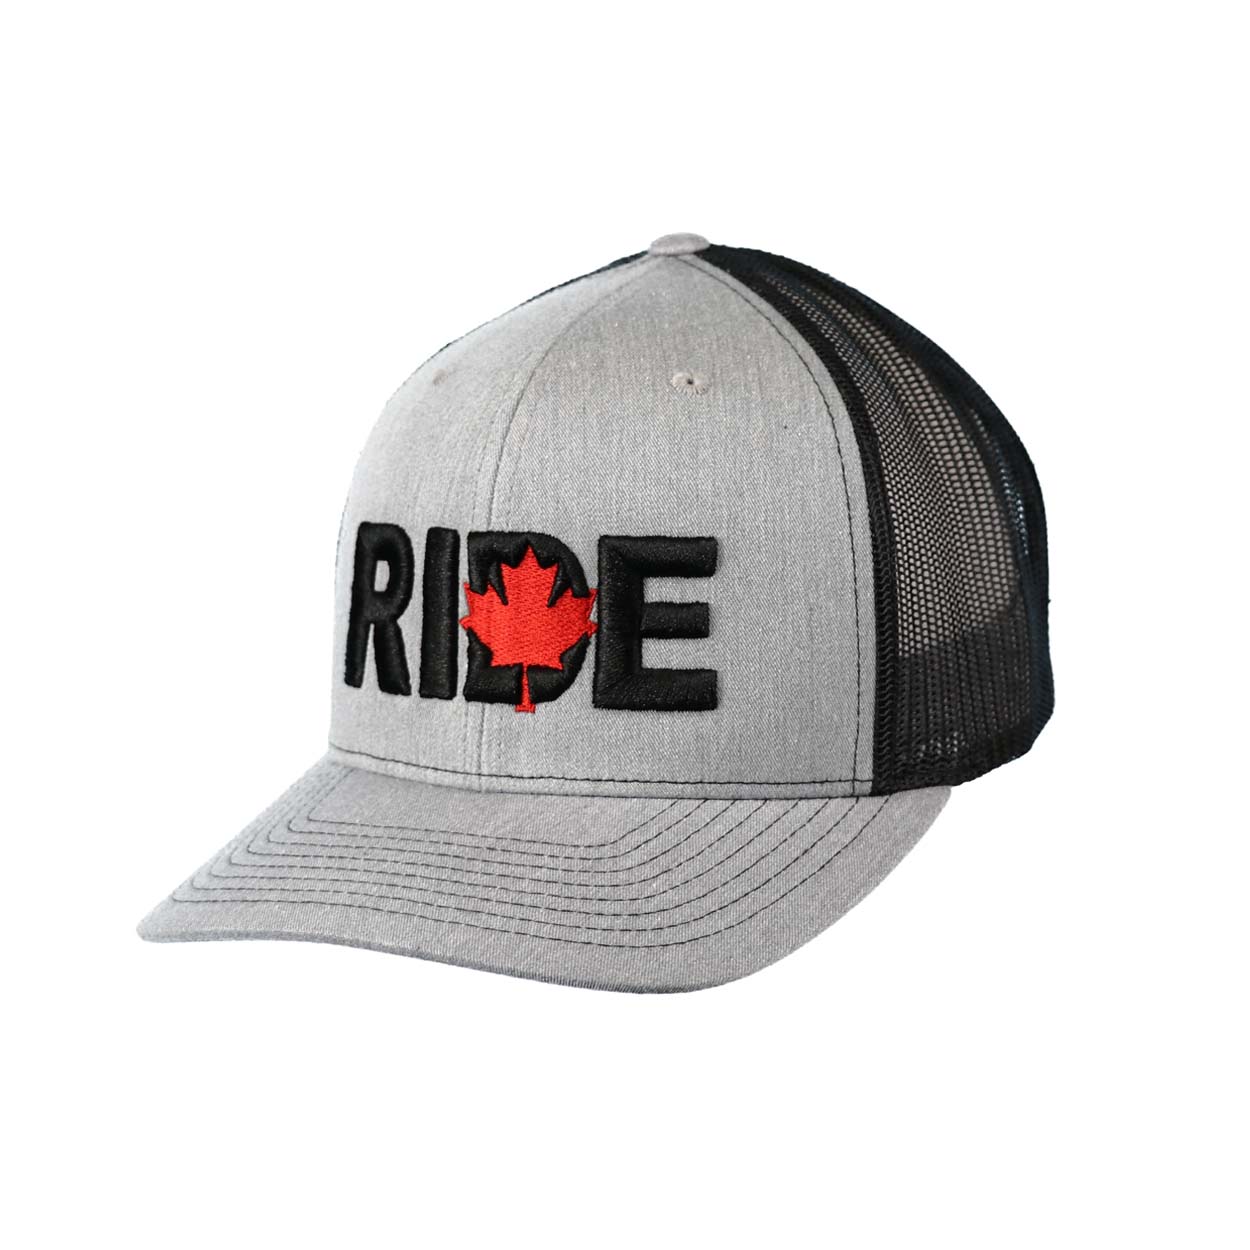 Ride Canada Classic Embroidered Snapback Trucker Hat Gray/Red